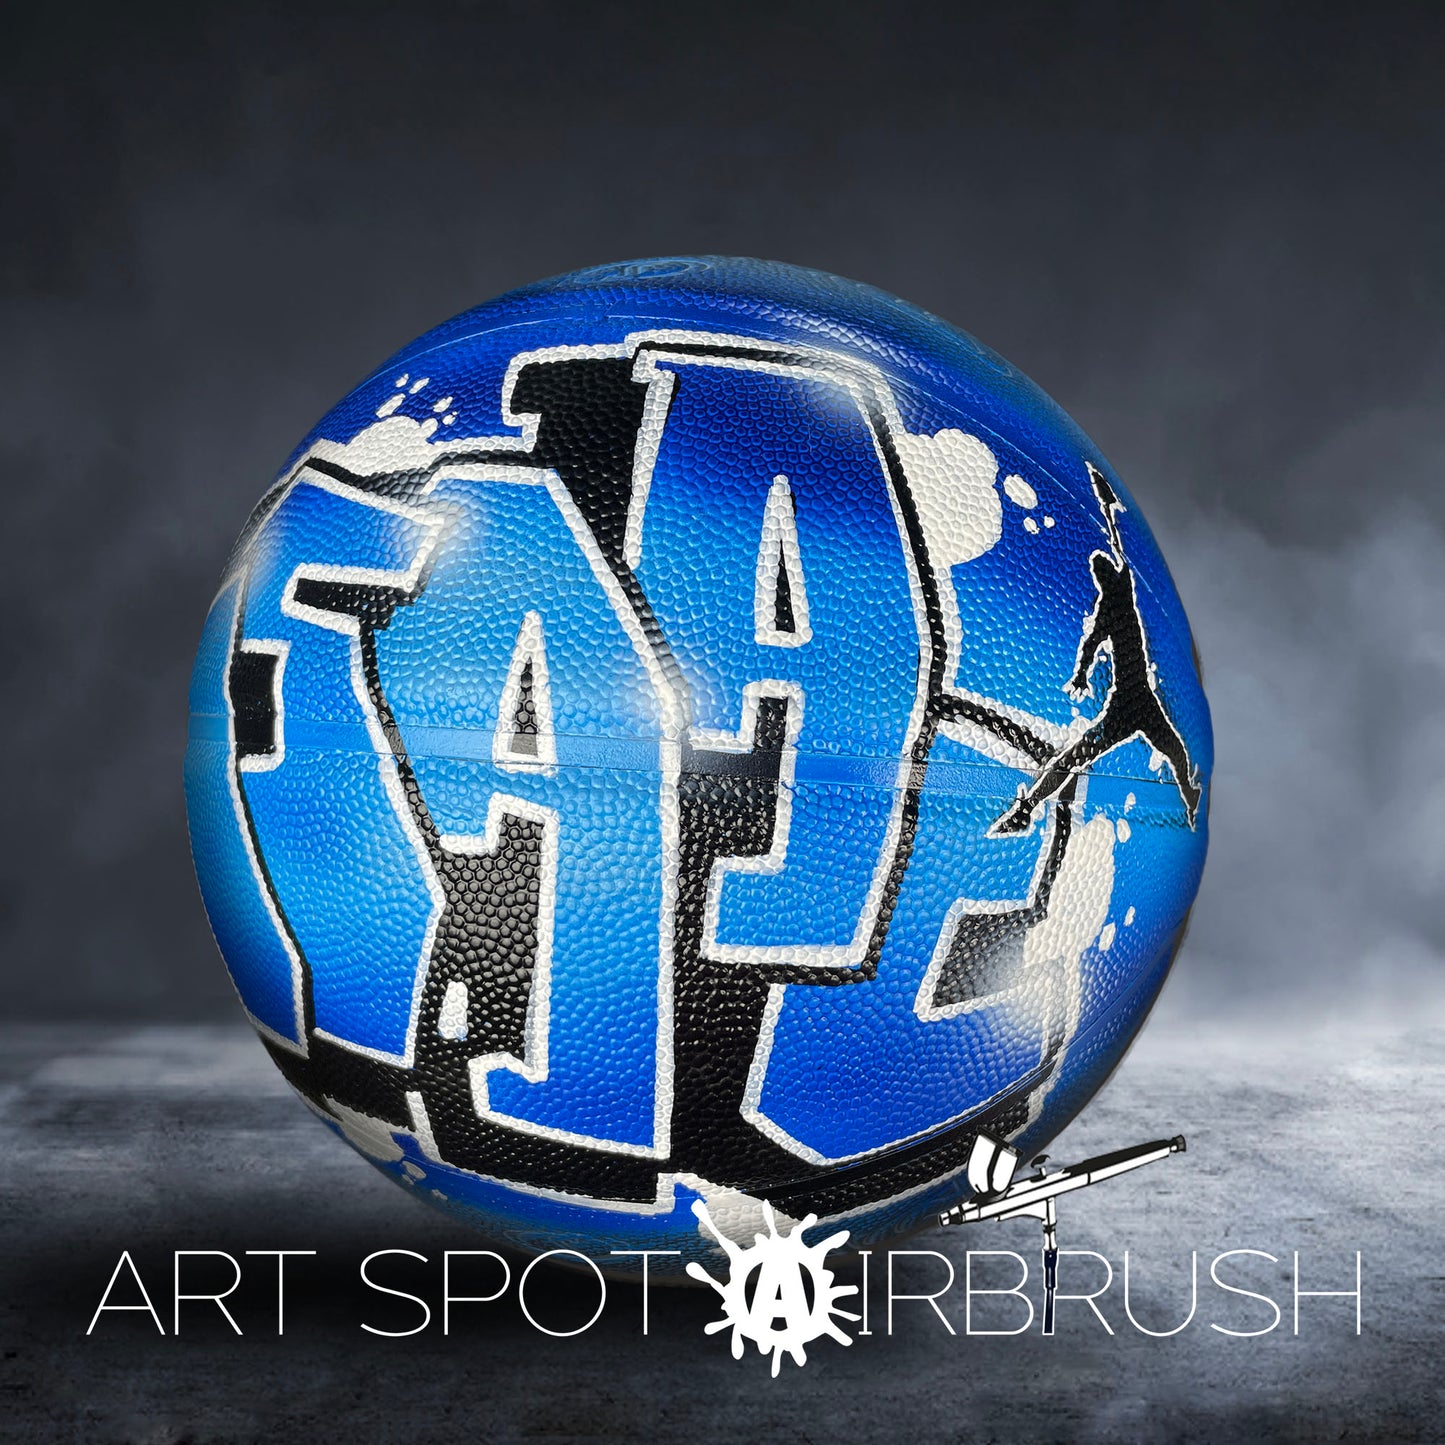 Personalized Basketball with Name in Graffiti